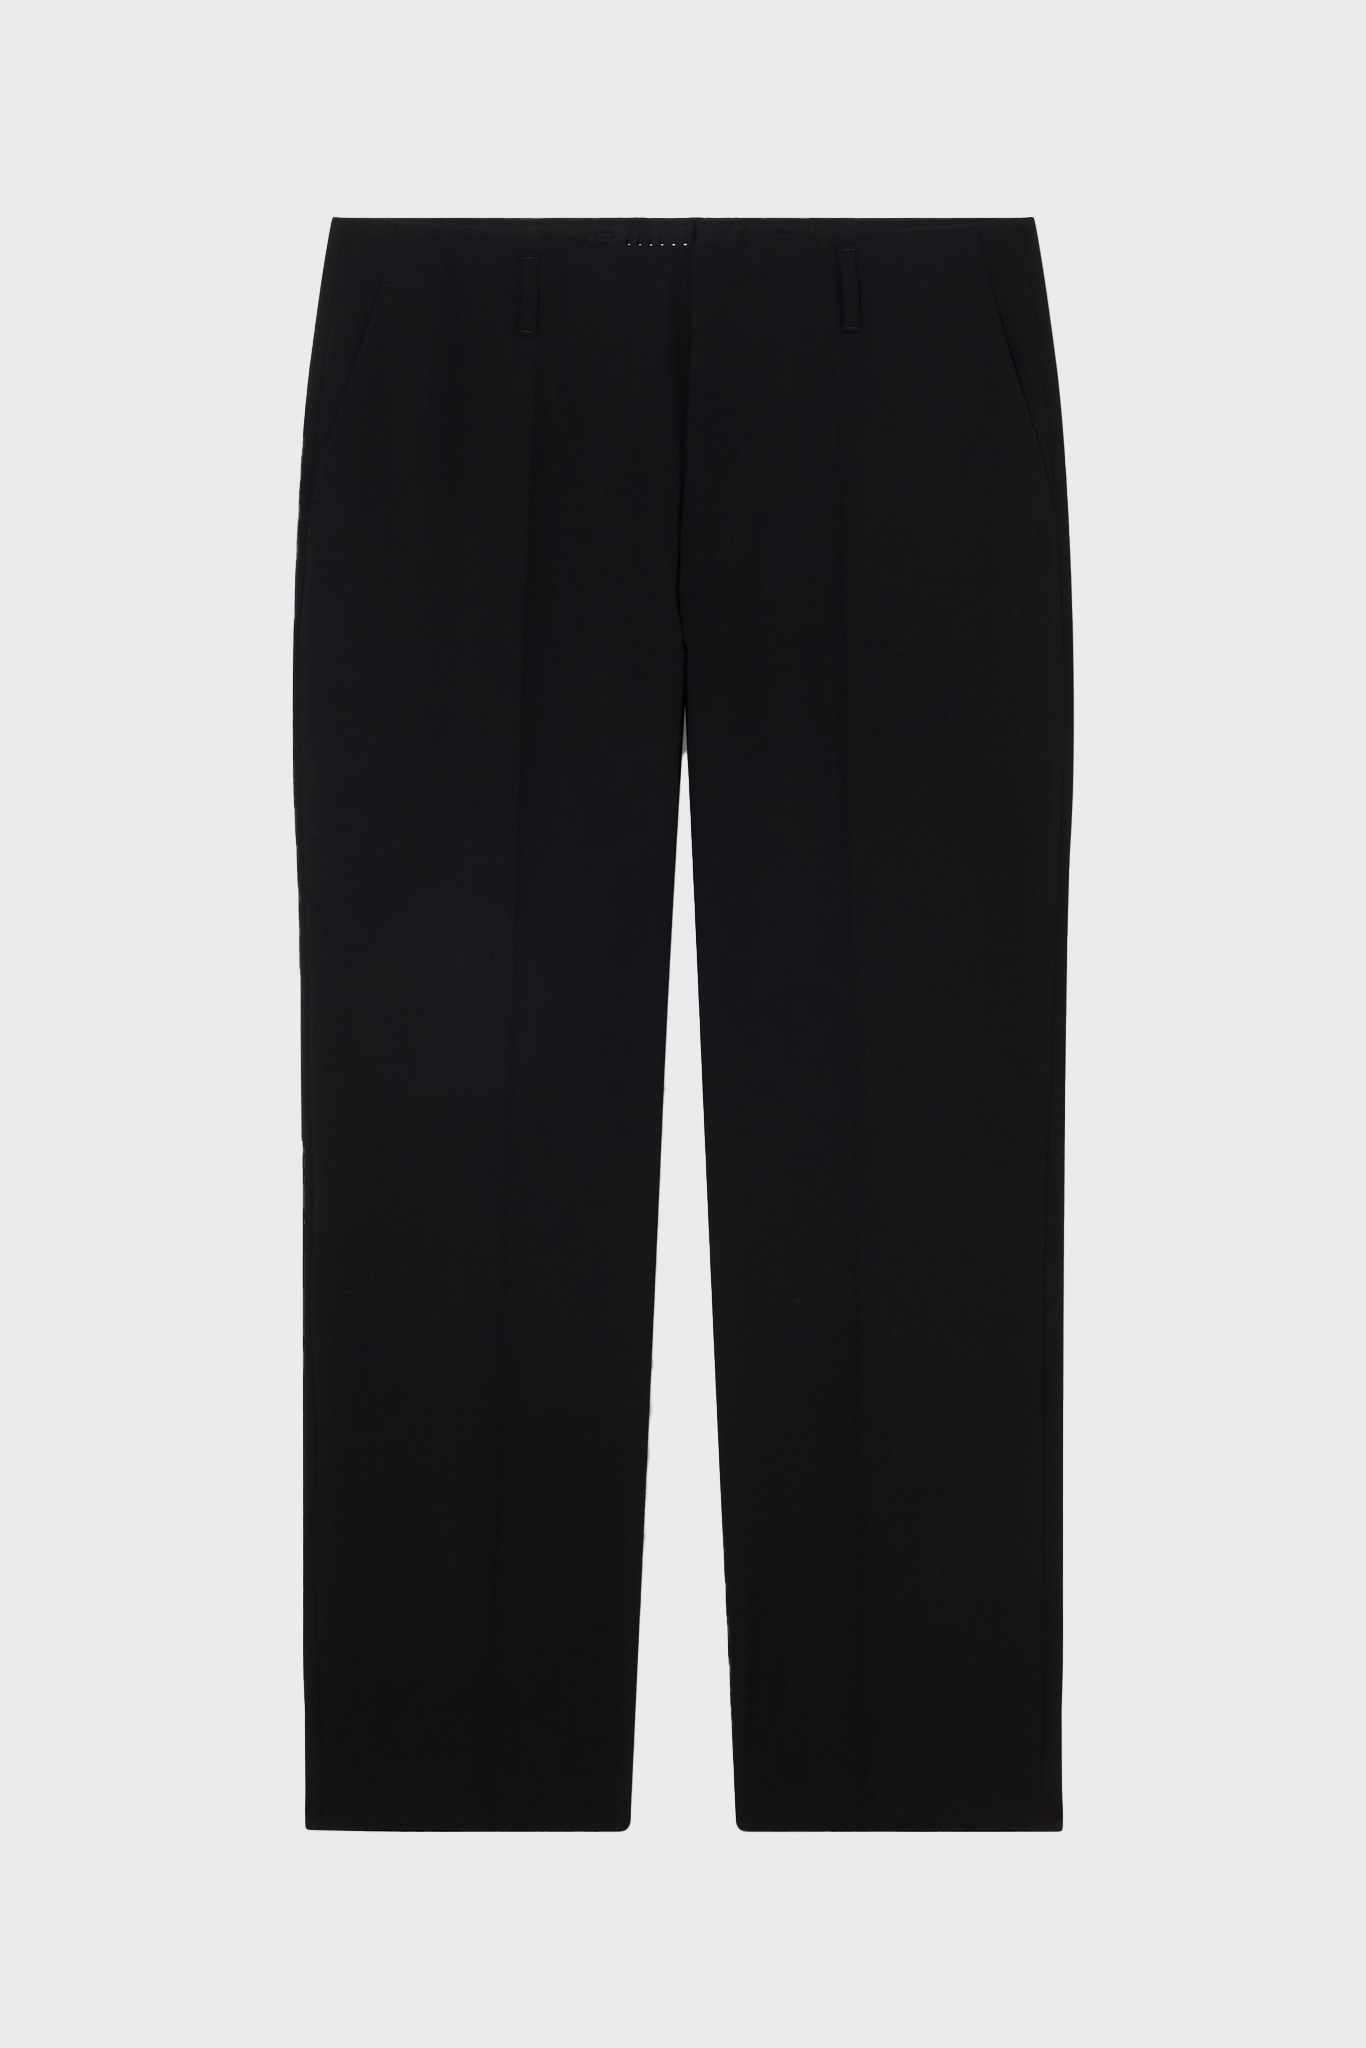 Plain-Woven Wool Creased Black Trousers